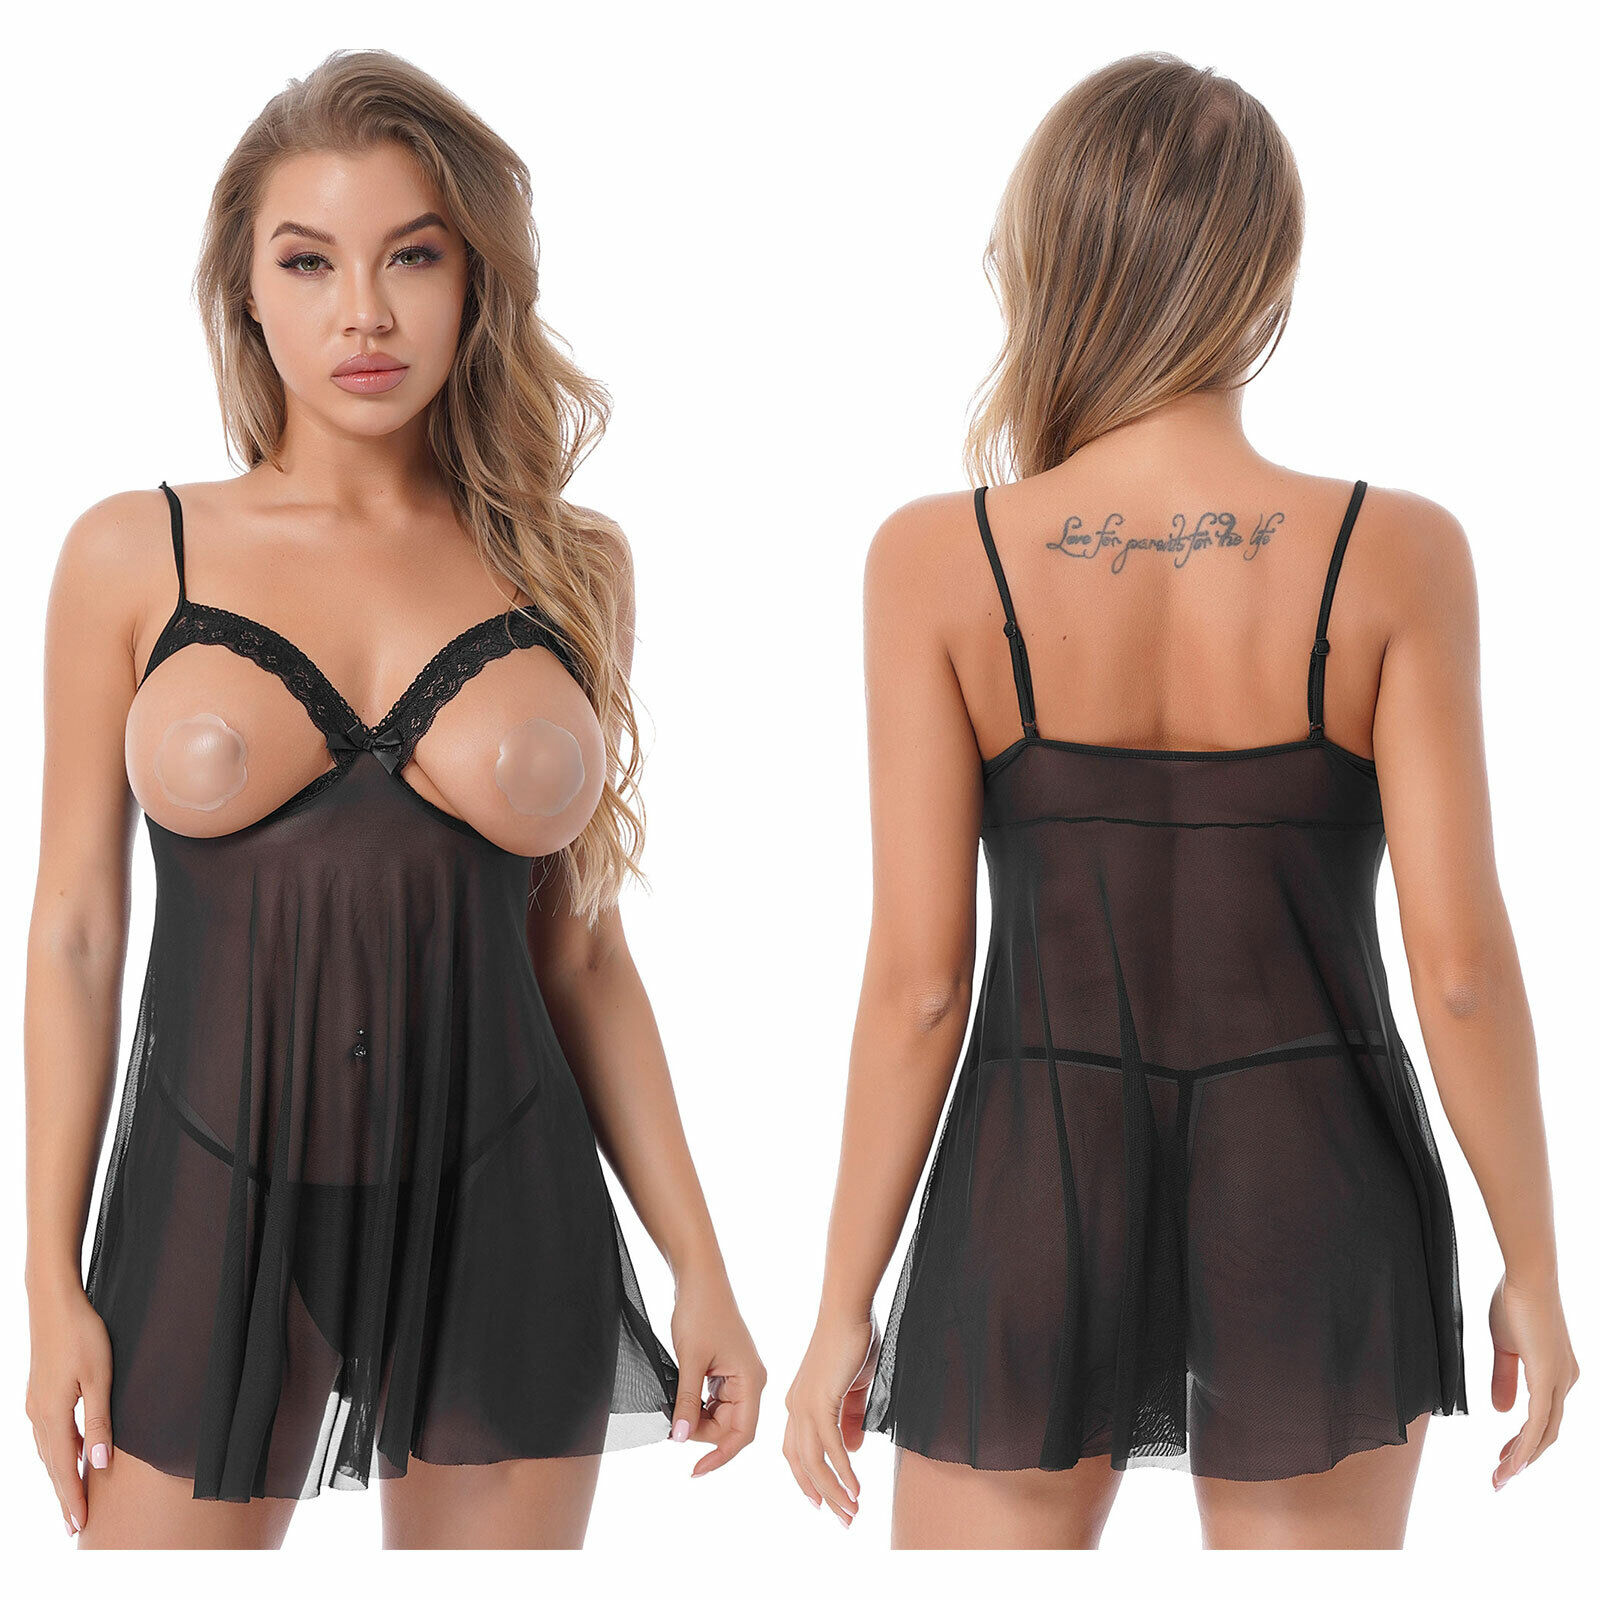 Babydoll Lace Open Cup See Through Lingerie